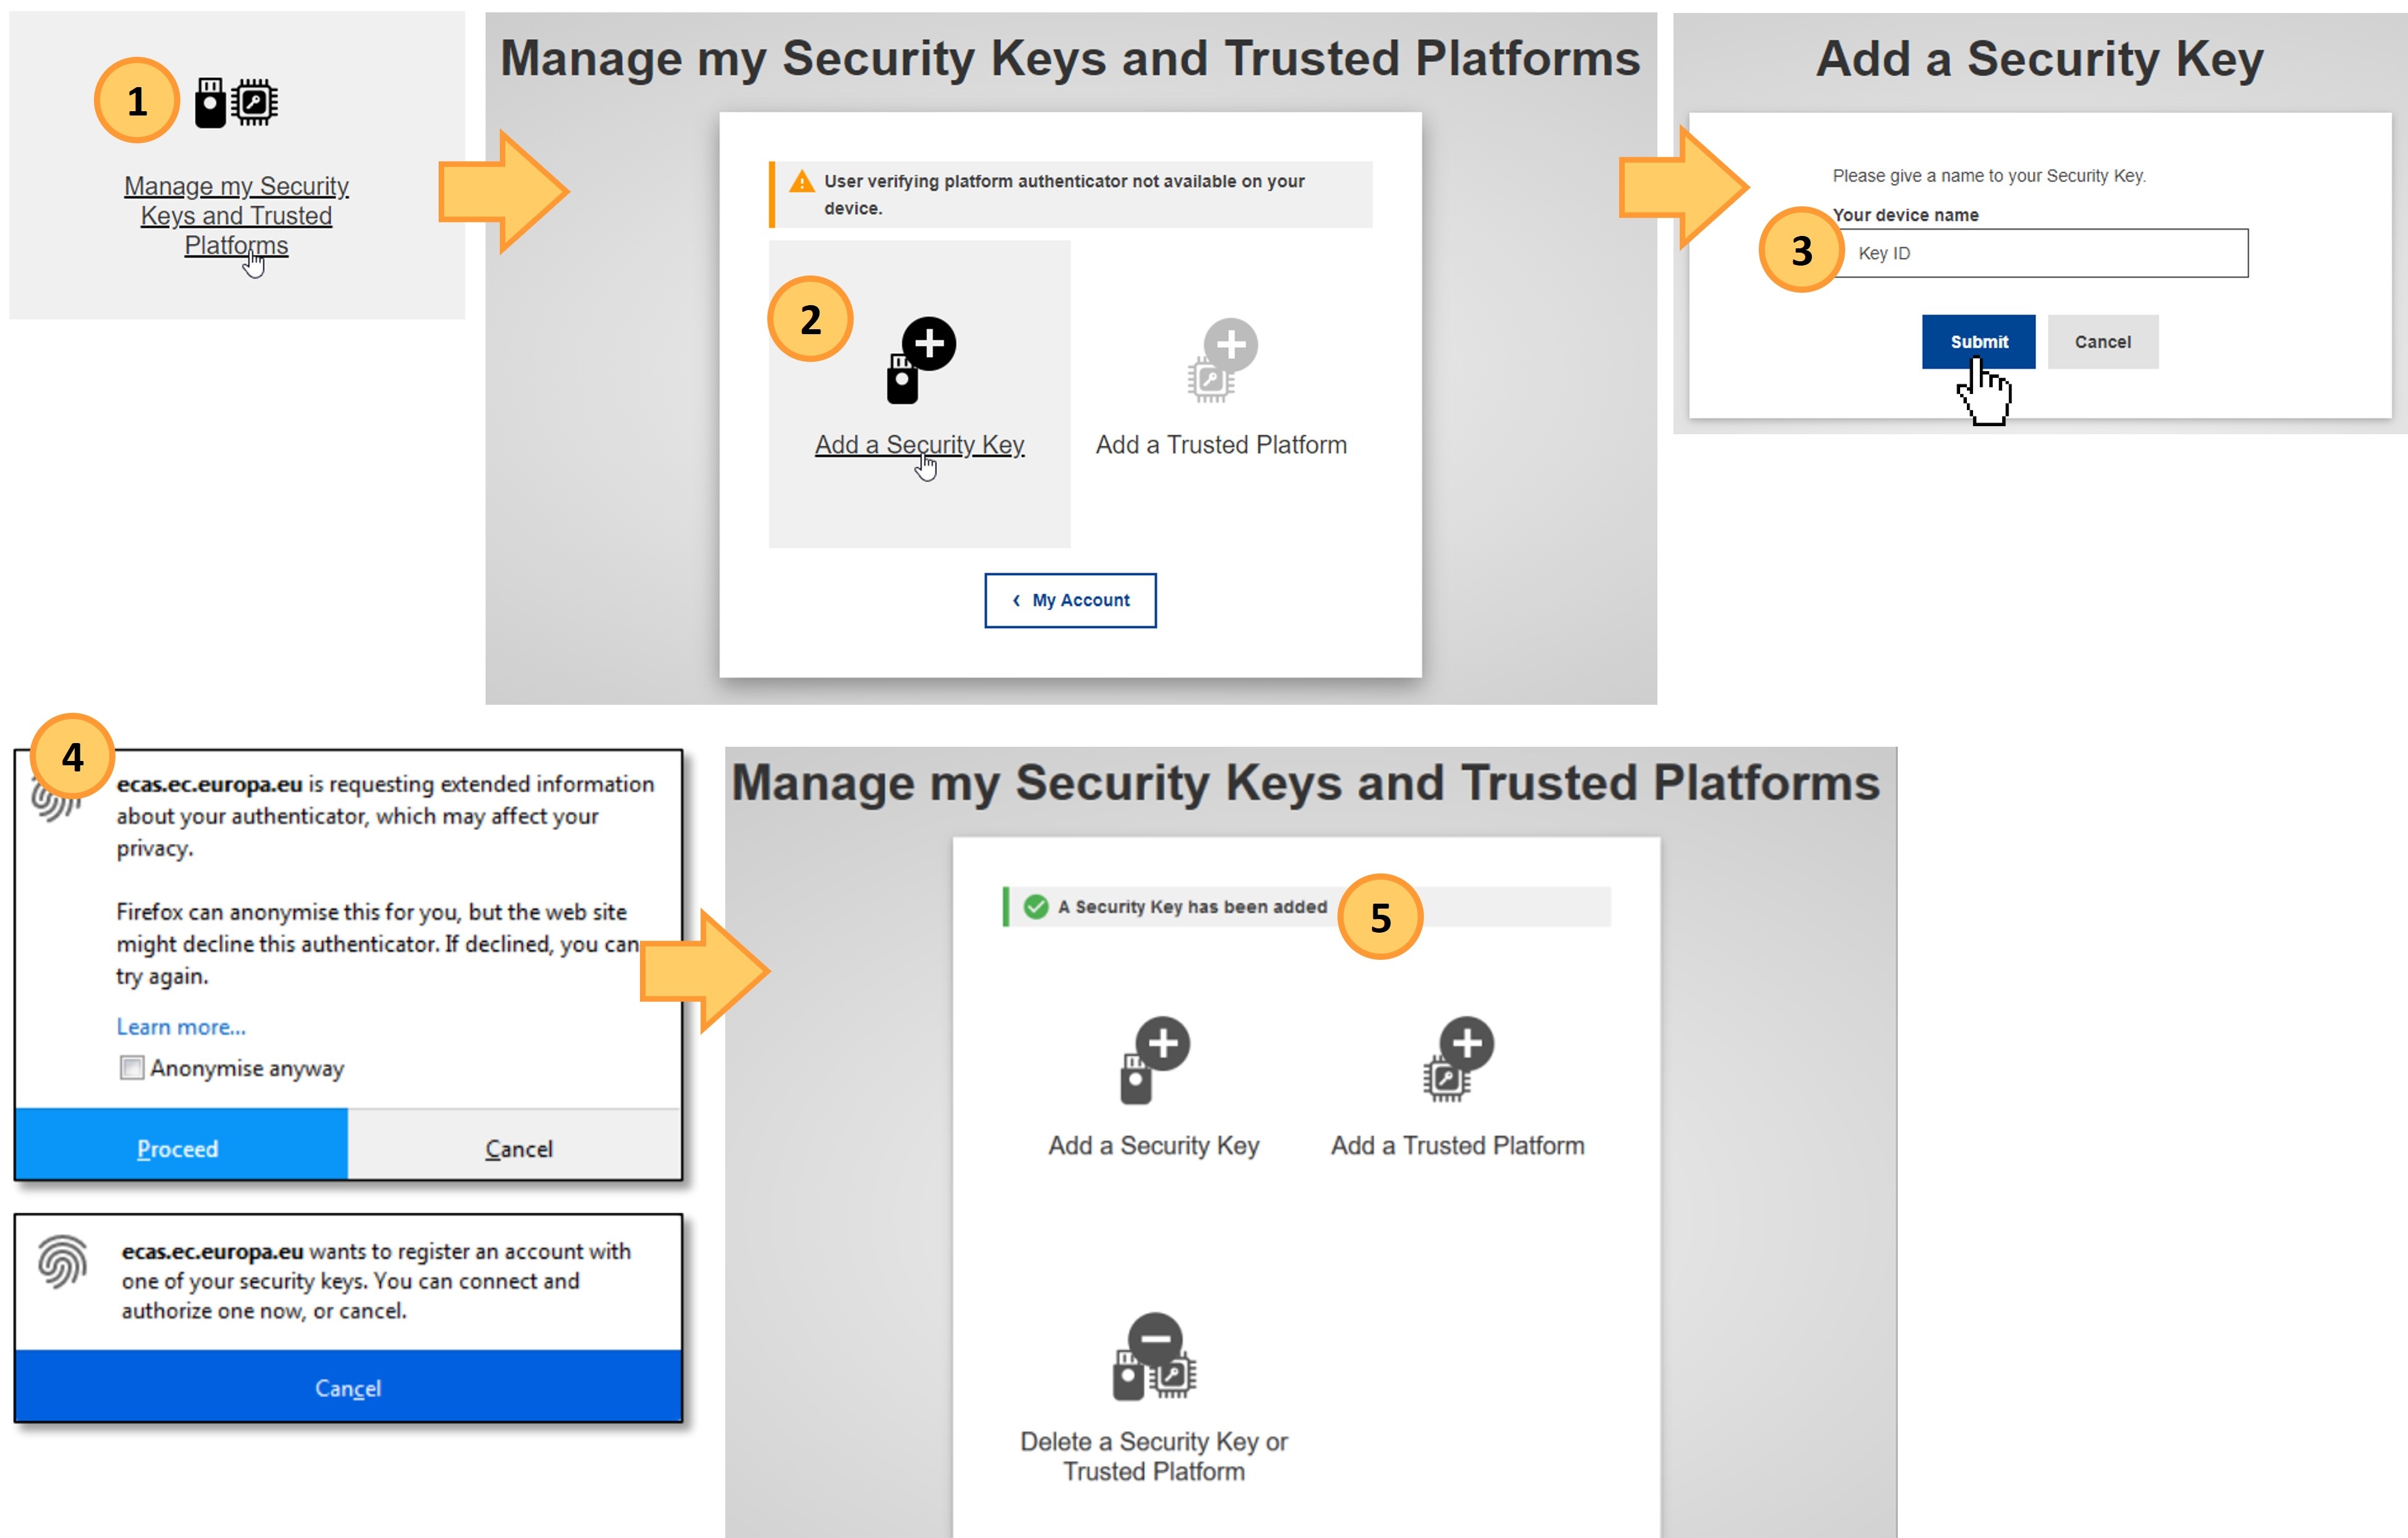 Manage my Security Keys and Trusted Platforms